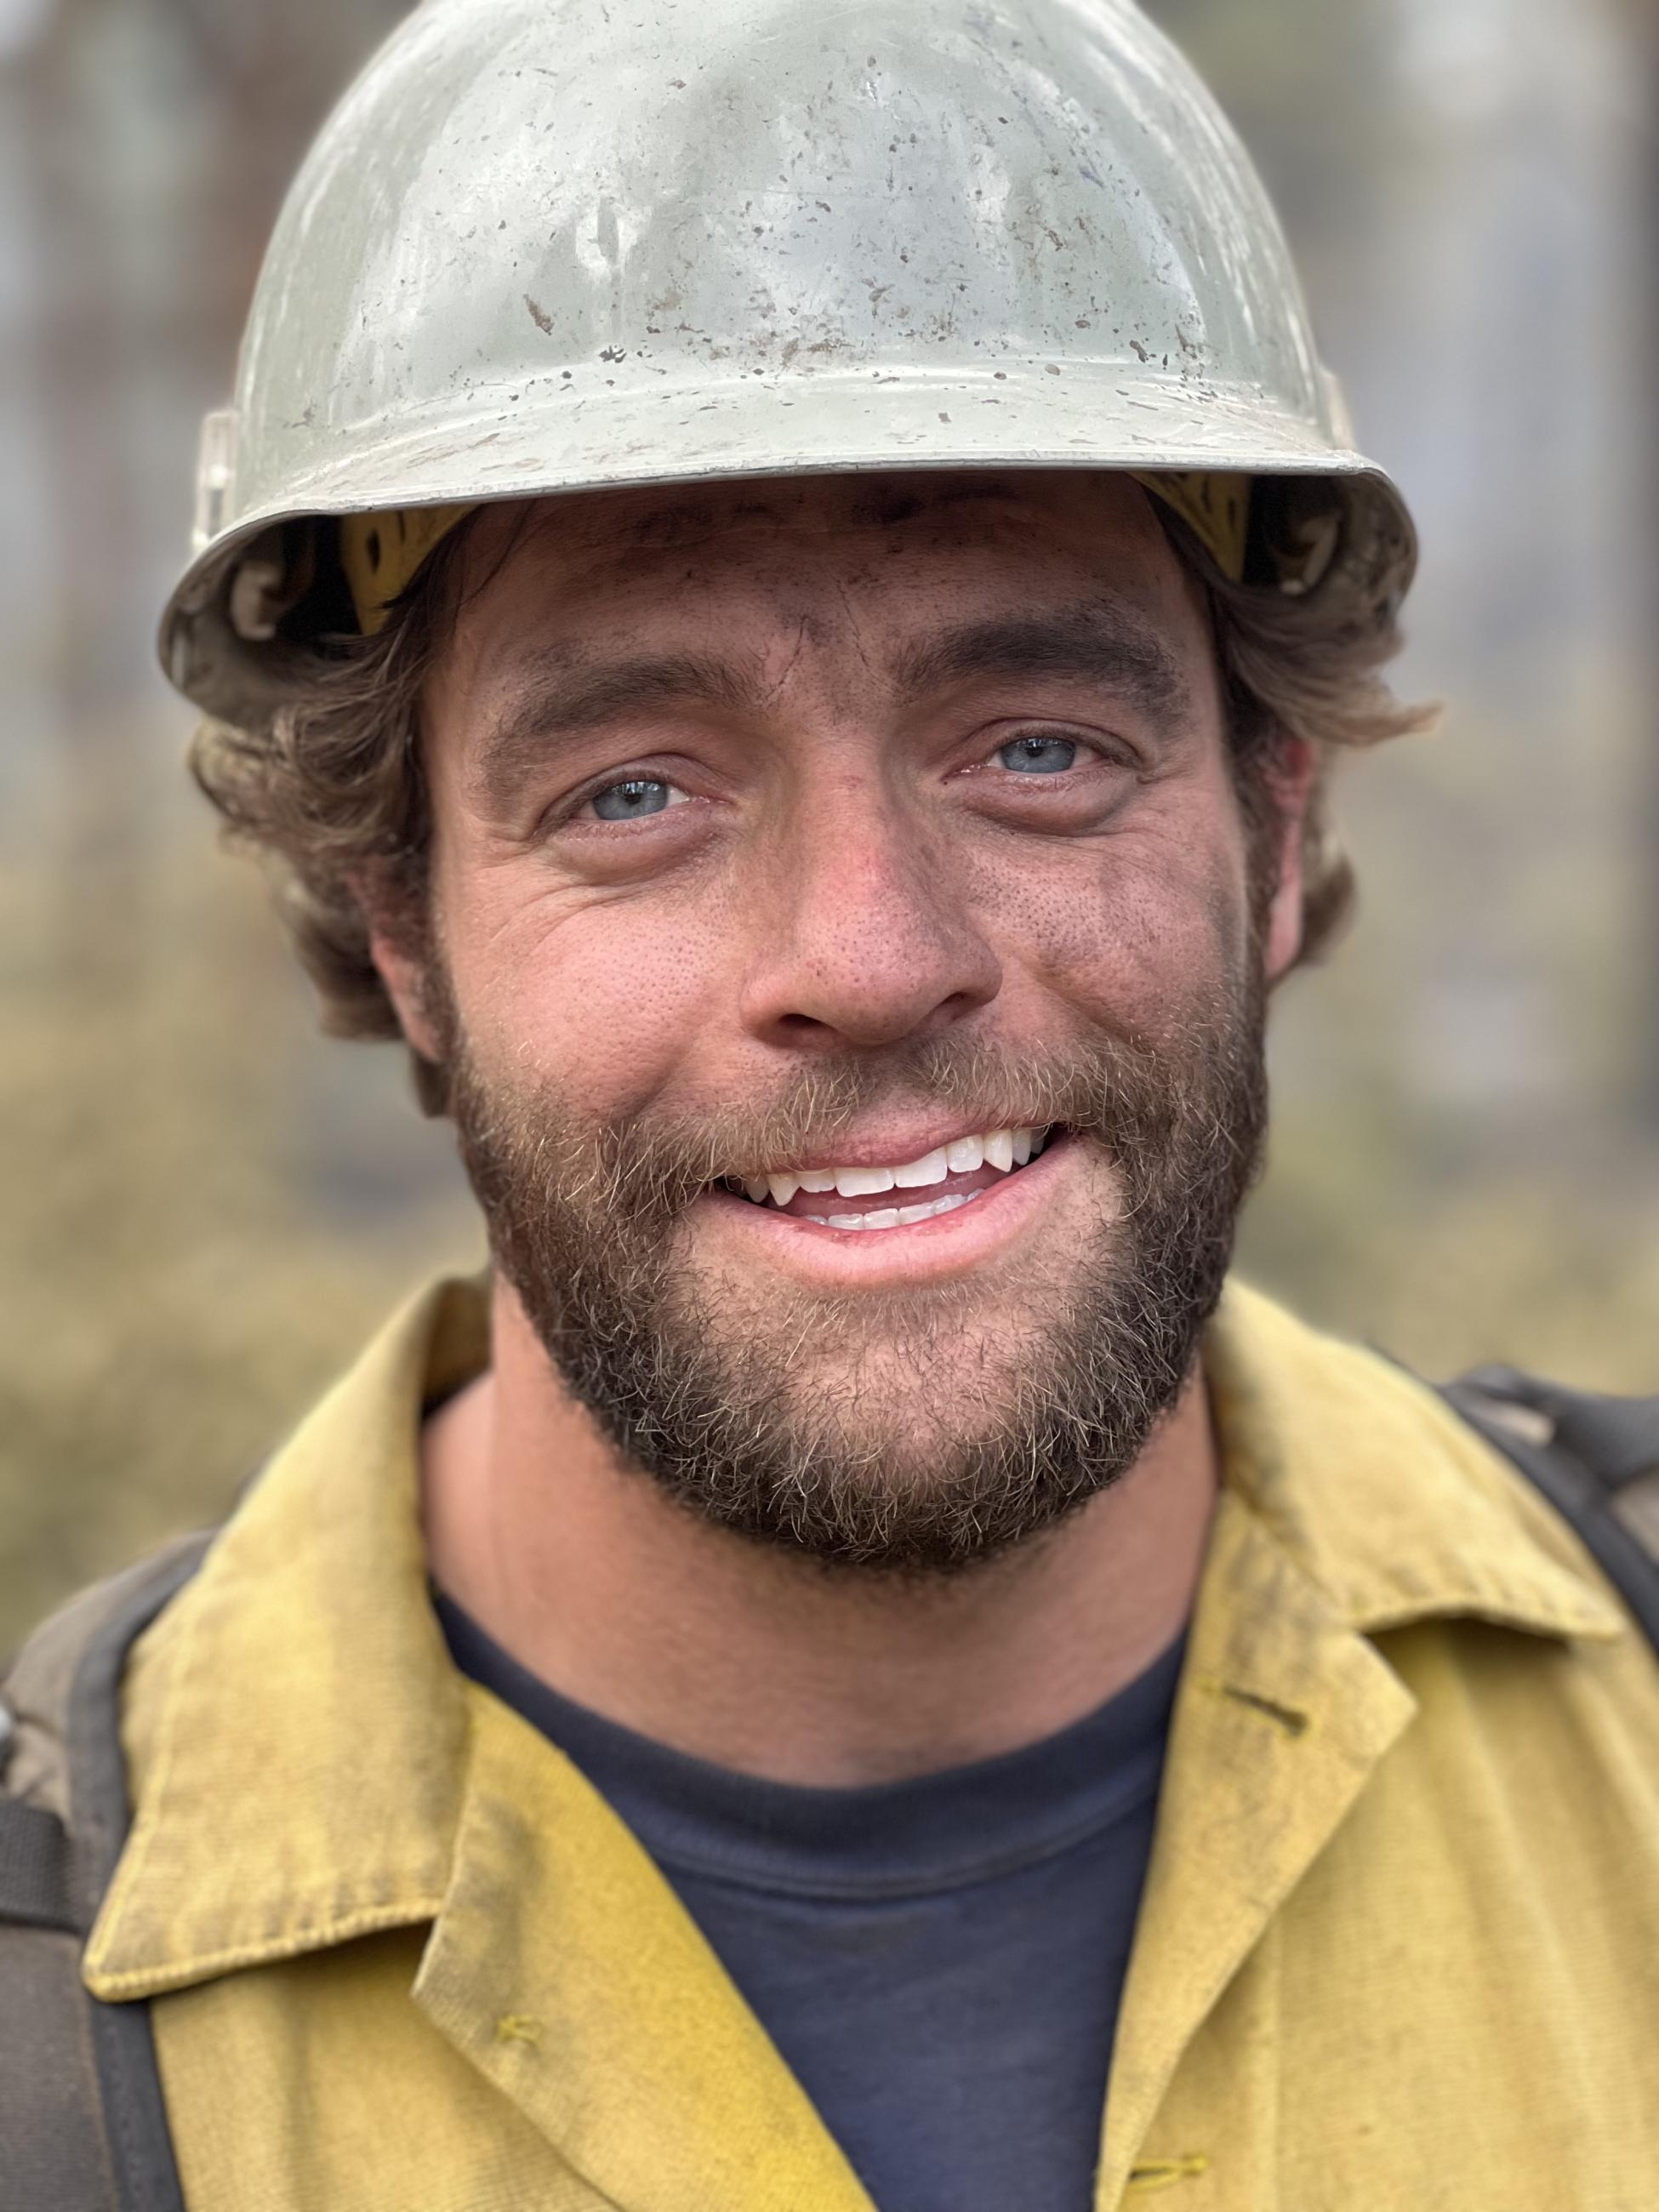 A bearded firefighter in a grey fire helmet smiles at the camera.